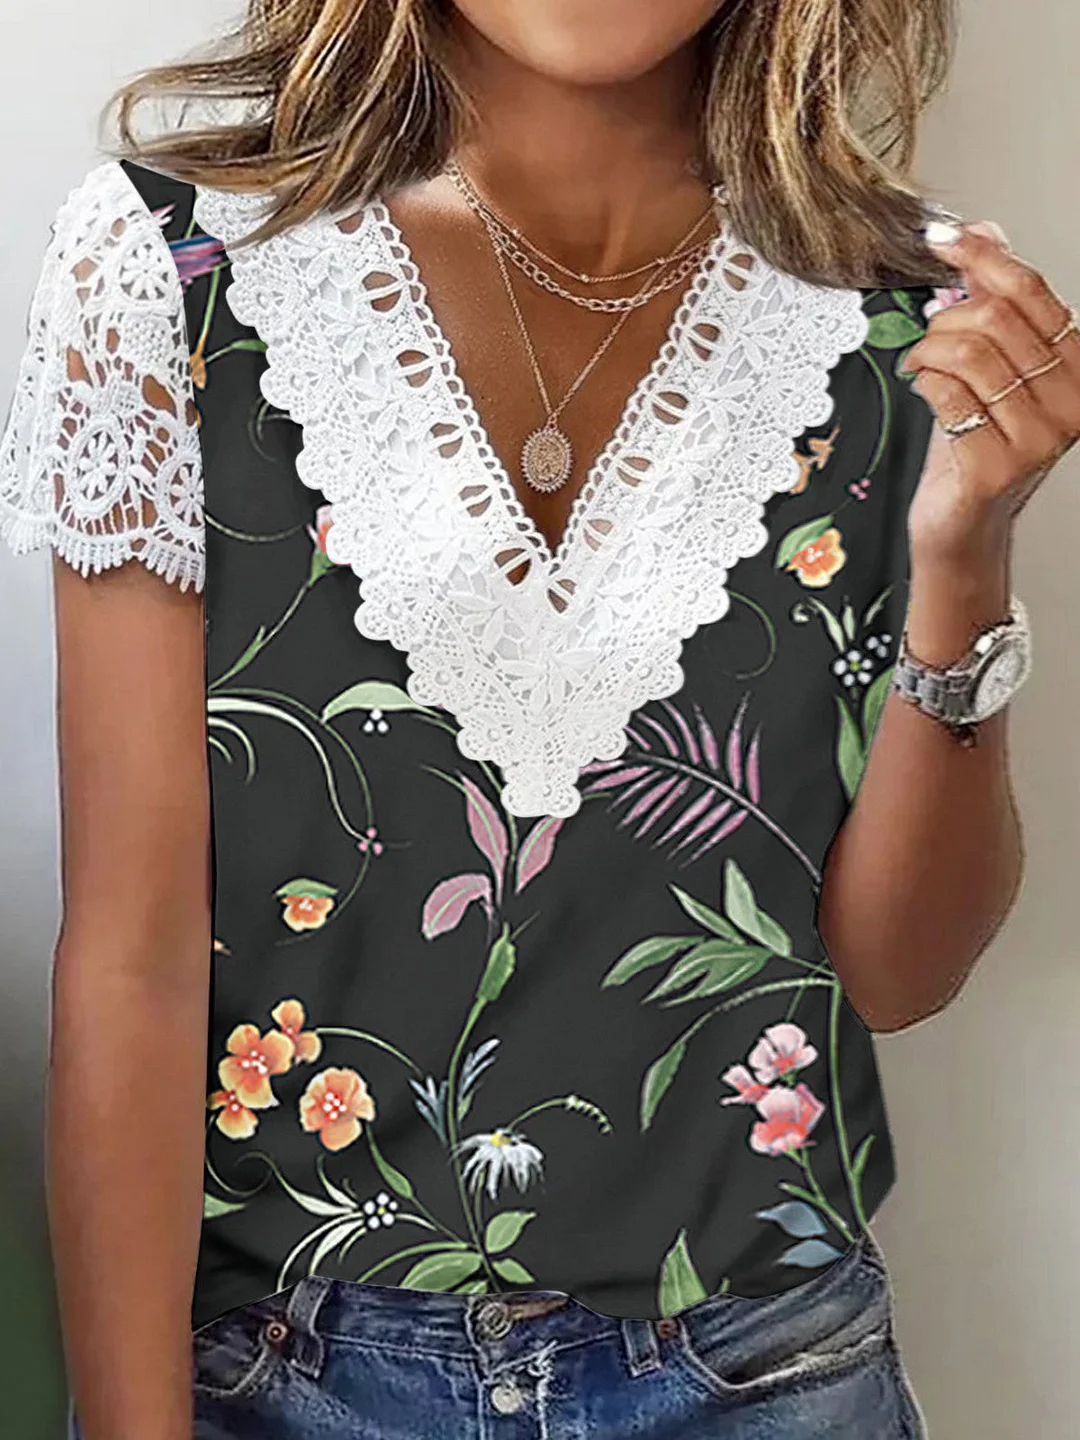 Women's Short Sleeve V Neck Lace Floral Printed Fashion Casual Top